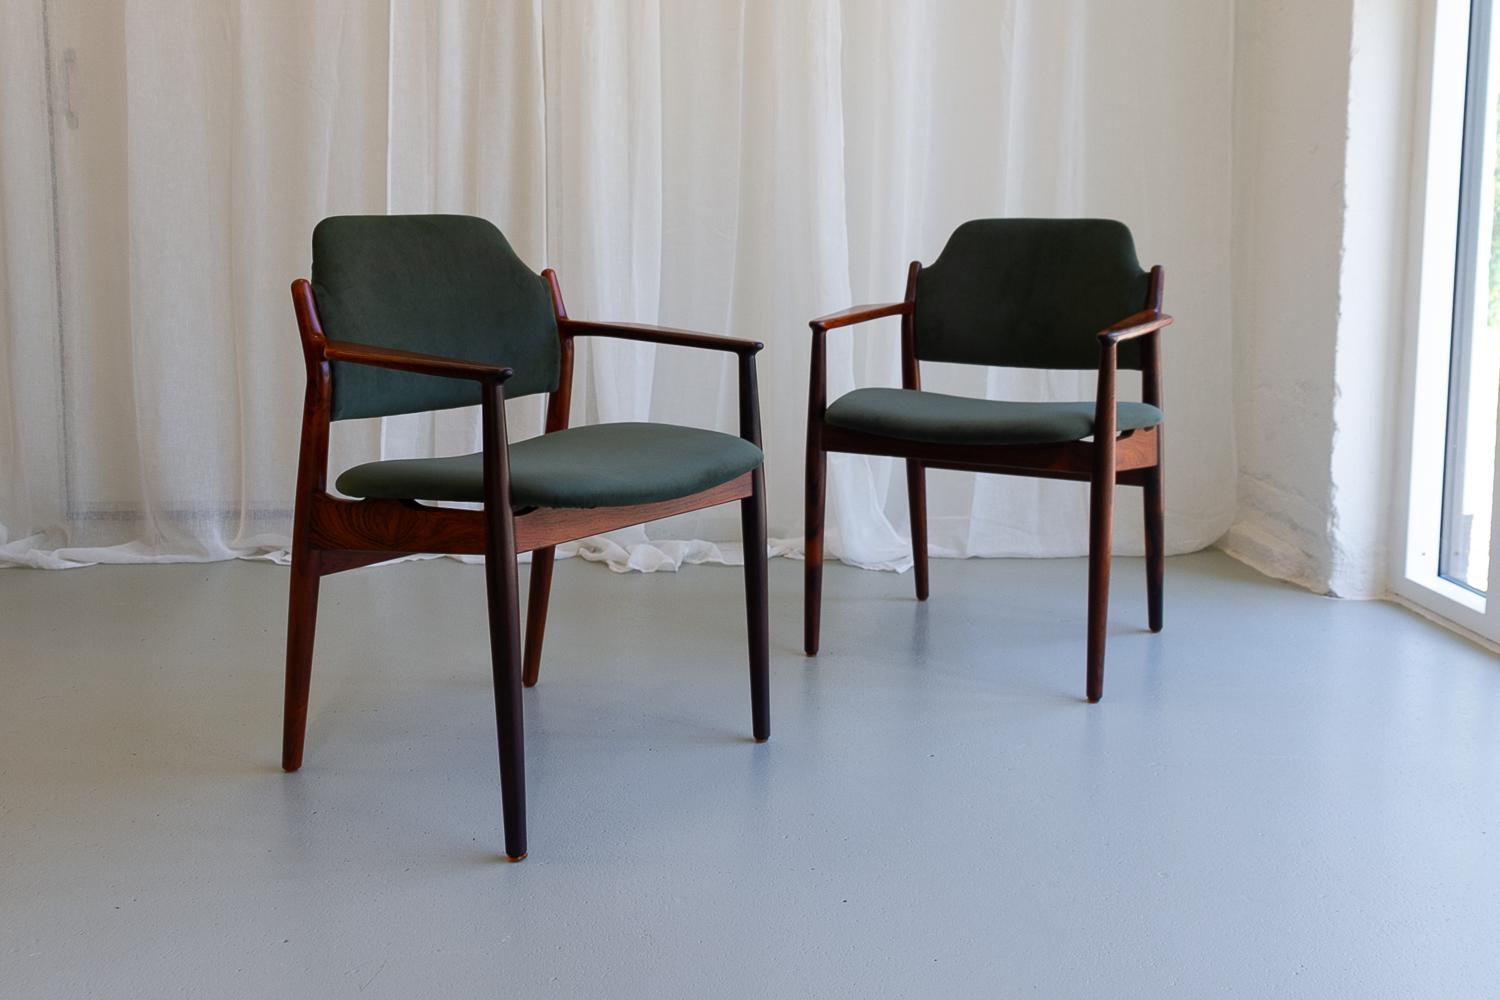 Pair of Scandinavian Mid-Century Modern armchairs in solid Rosewood/palisander re-upholstered in pine green velvet.
Designed by Arne Vodder for Sibast Møbler, Denmark in the 1960s.

Round tapered legs. Back legs extends up to support the flared